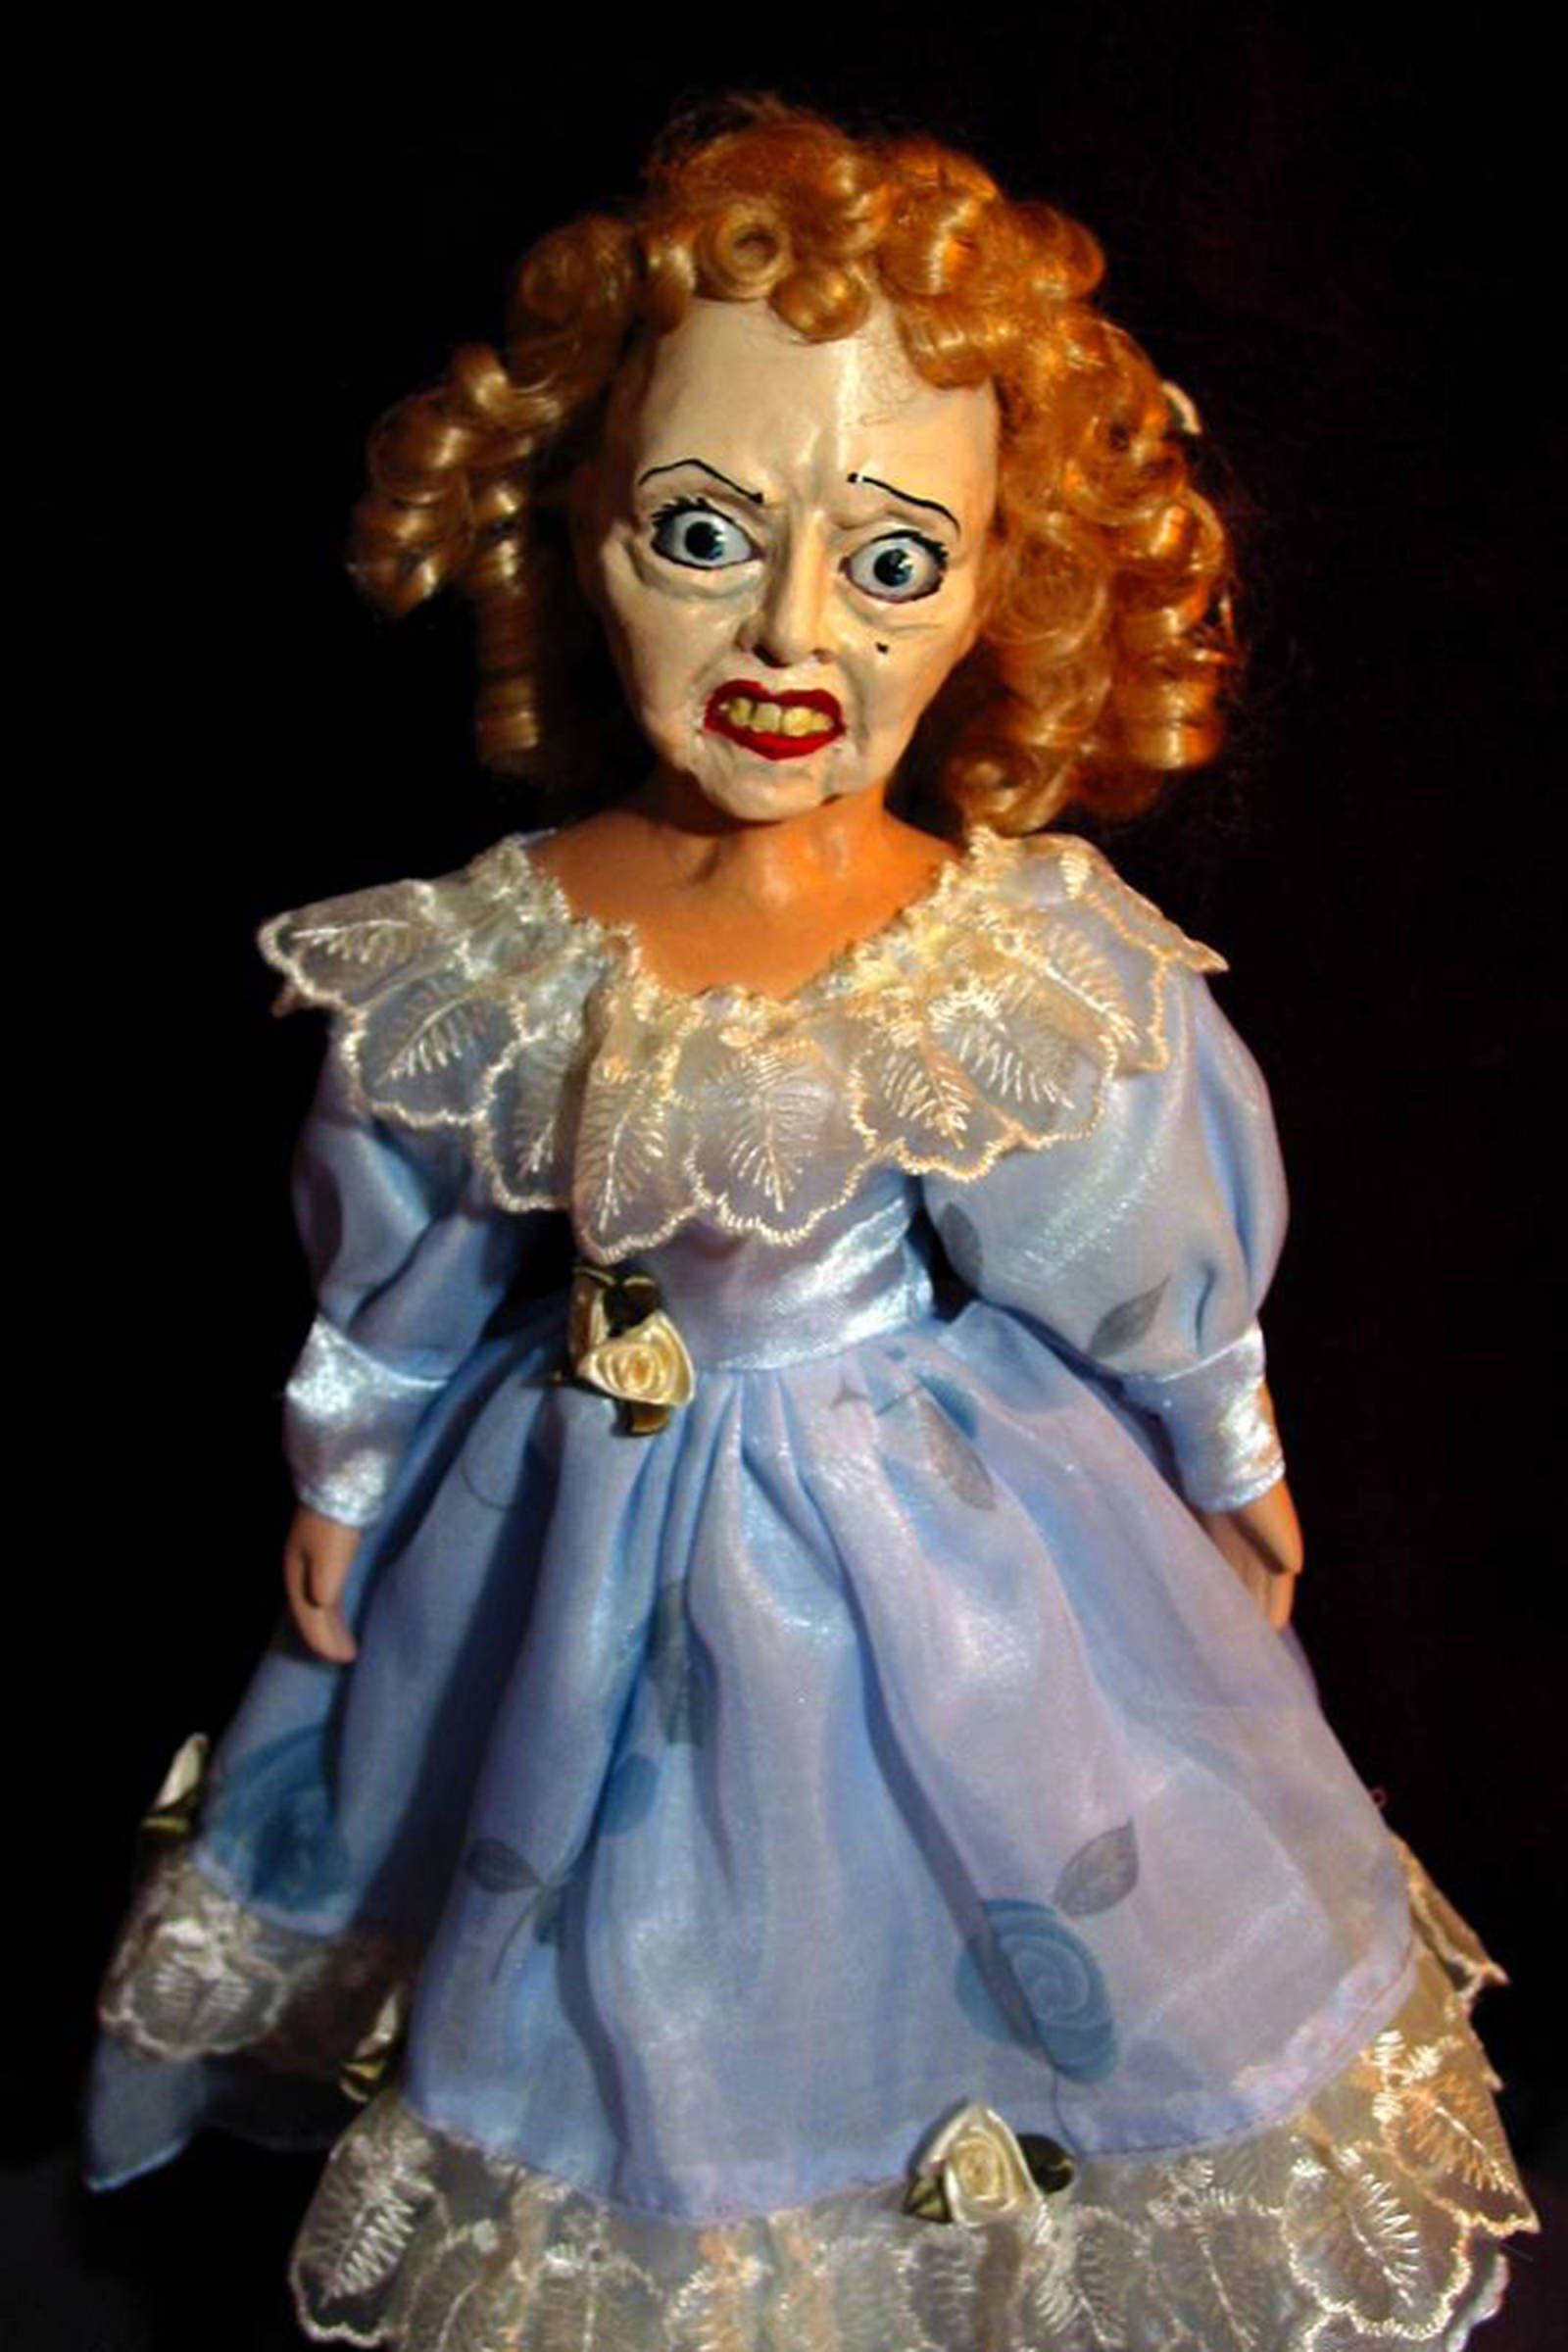 creepiest dolls in the world